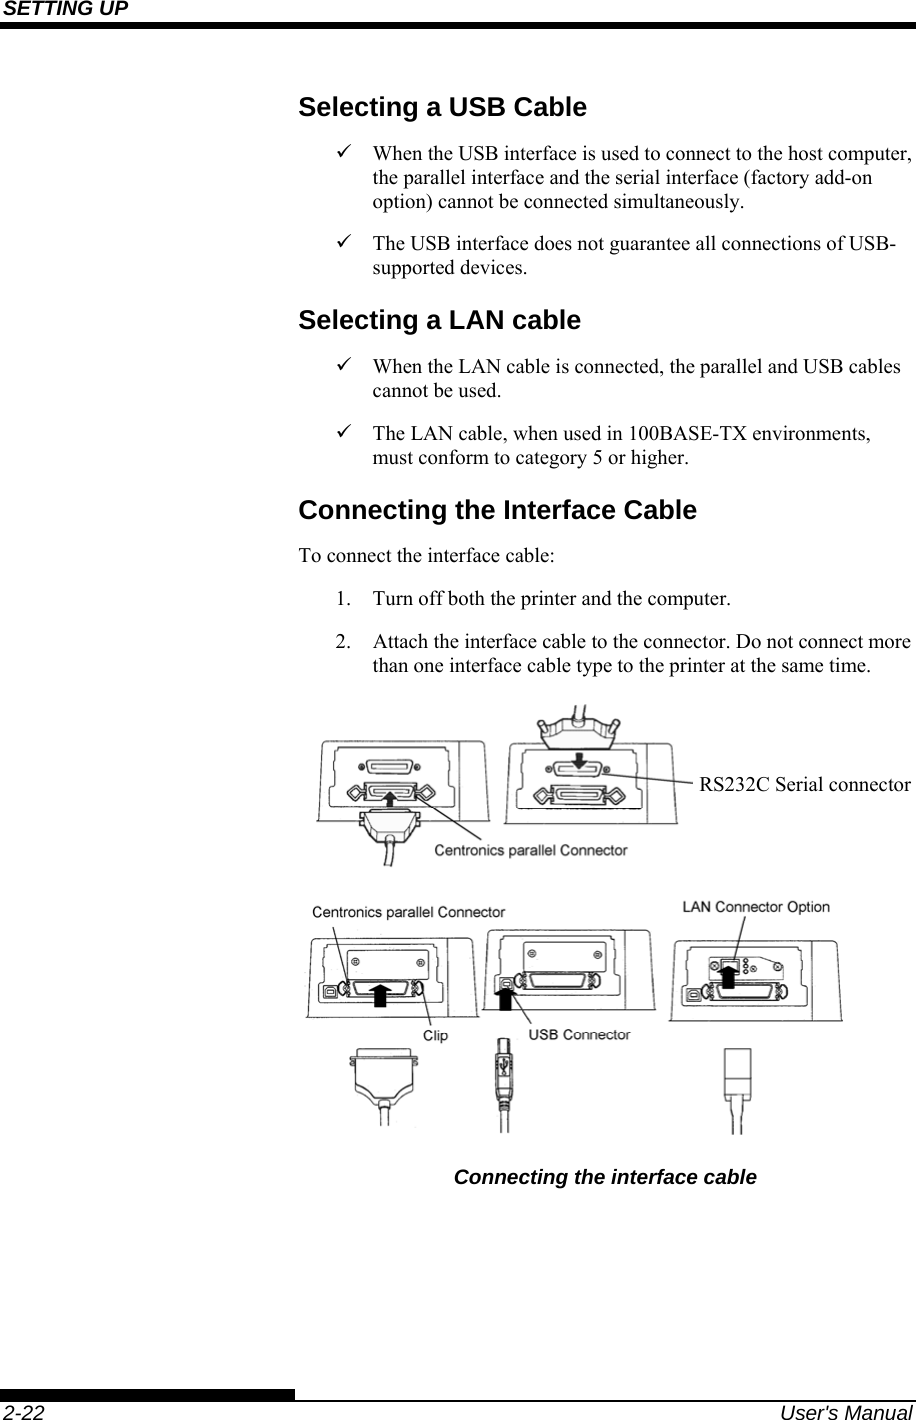 SETTING UP    2-22  User&apos;s Manual Selecting a USB Cable 9  When the USB interface is used to connect to the host computer, the parallel interface and the serial interface (factory add-on option) cannot be connected simultaneously. 9  The USB interface does not guarantee all connections of USB-supported devices. Selecting a LAN cable 9  When the LAN cable is connected, the parallel and USB cables cannot be used. 9  The LAN cable, when used in 100BASE-TX environments, must conform to category 5 or higher. Connecting the Interface Cable To connect the interface cable: 1.  Turn off both the printer and the computer. 2.  Attach the interface cable to the connector. Do not connect more than one interface cable type to the printer at the same time.  Connecting the interface cable RS232C Serial connector 